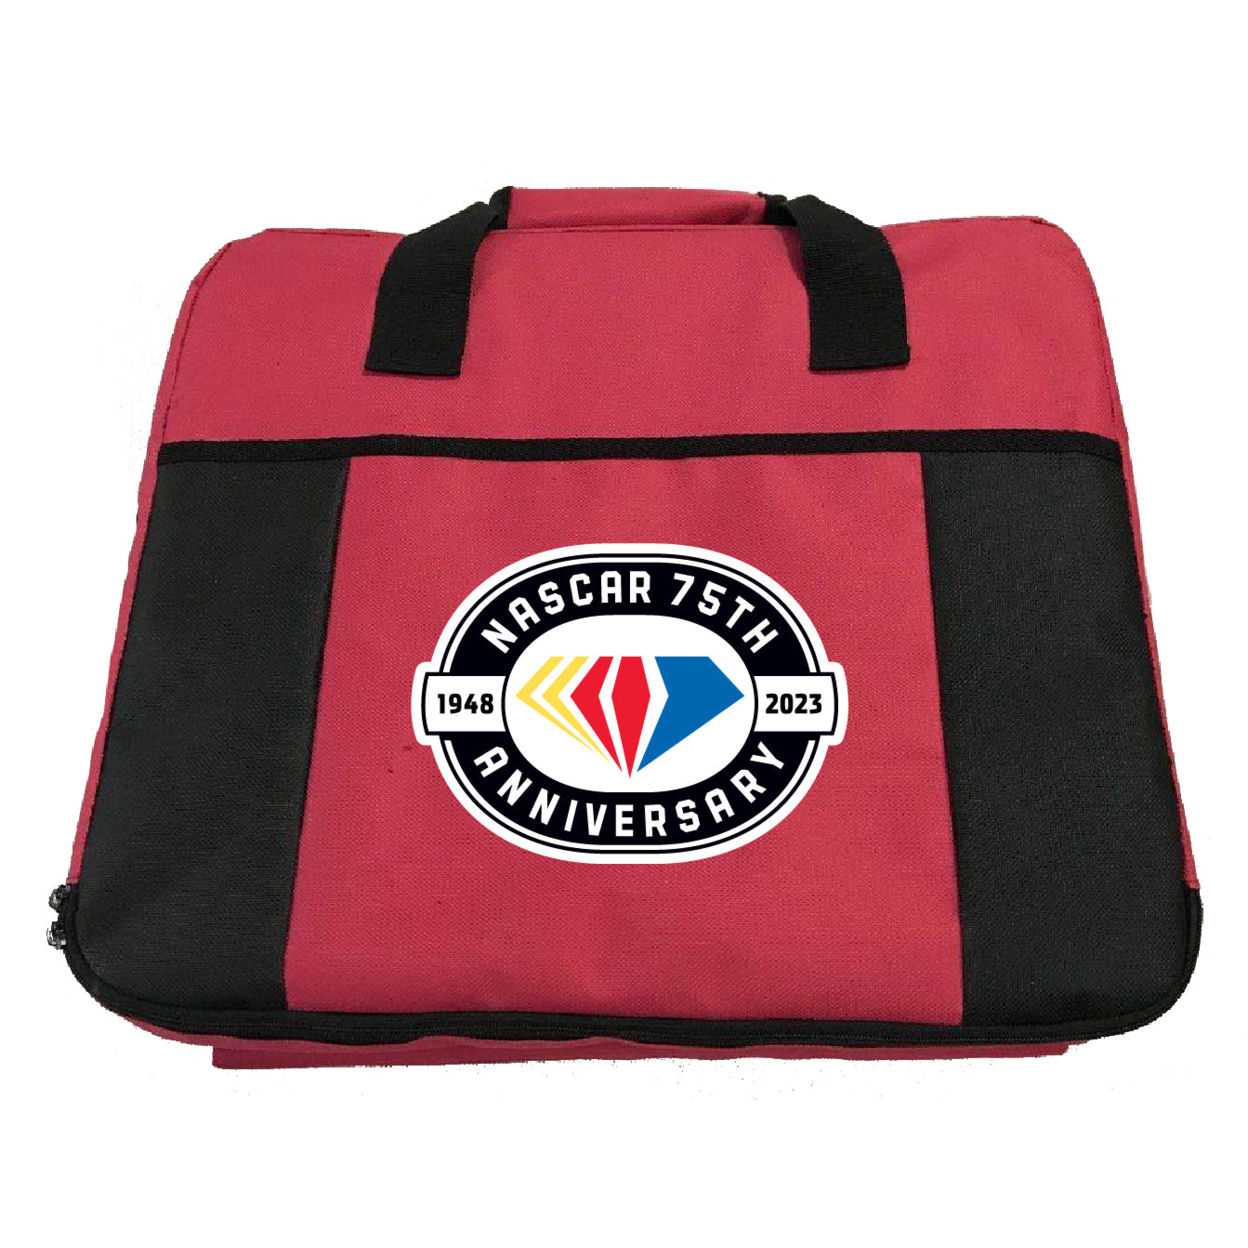 NASCAR 75 Year Anniversary Officially Licensed Deluxe Seat Cushion - Blue